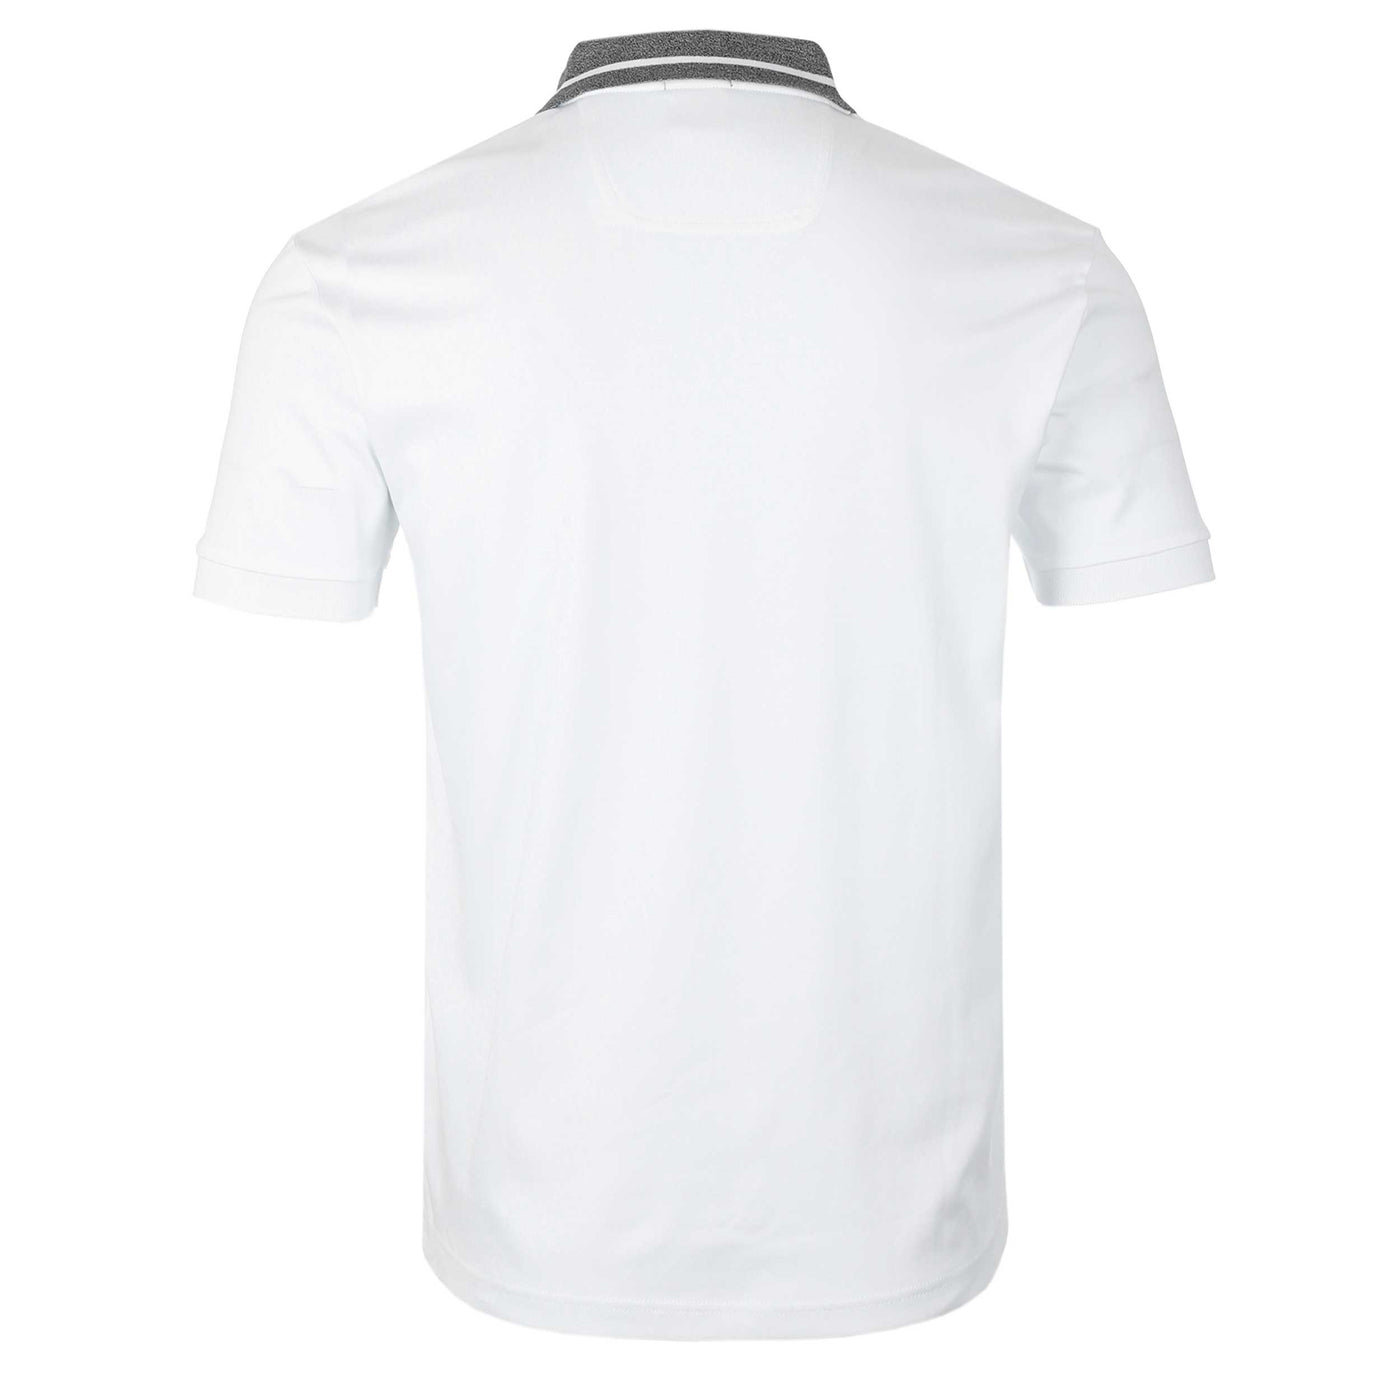 Boss Paddy 1 Polo Shirt in White Back